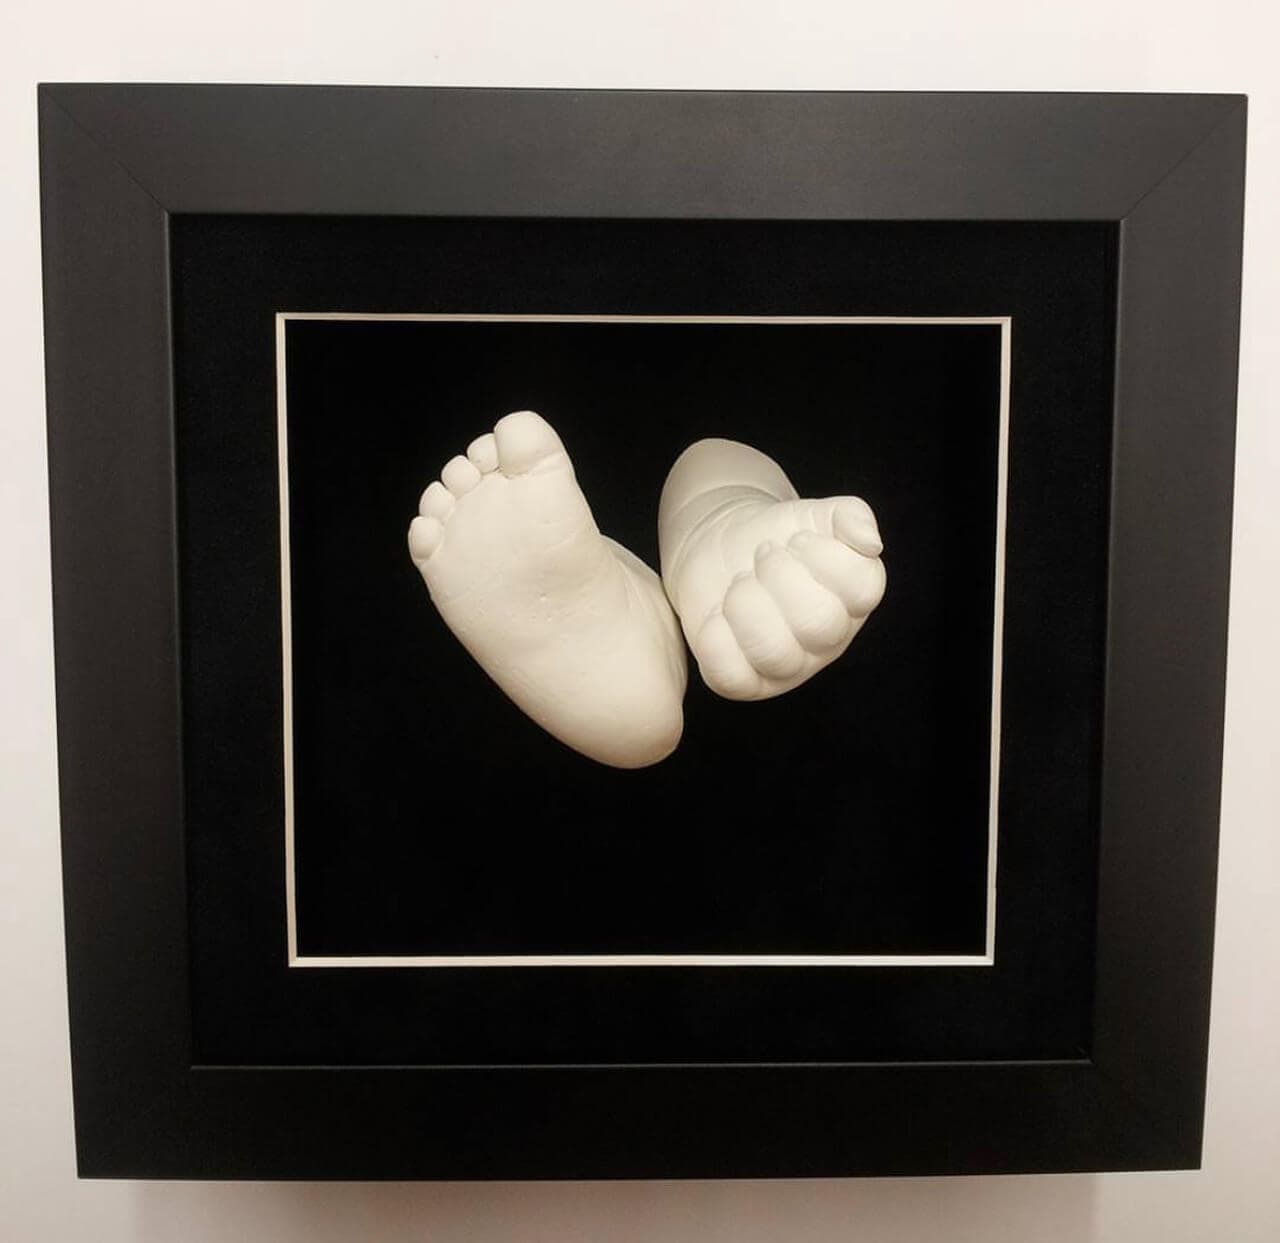 A sculpture of a baby's foot & hand in a black frame.